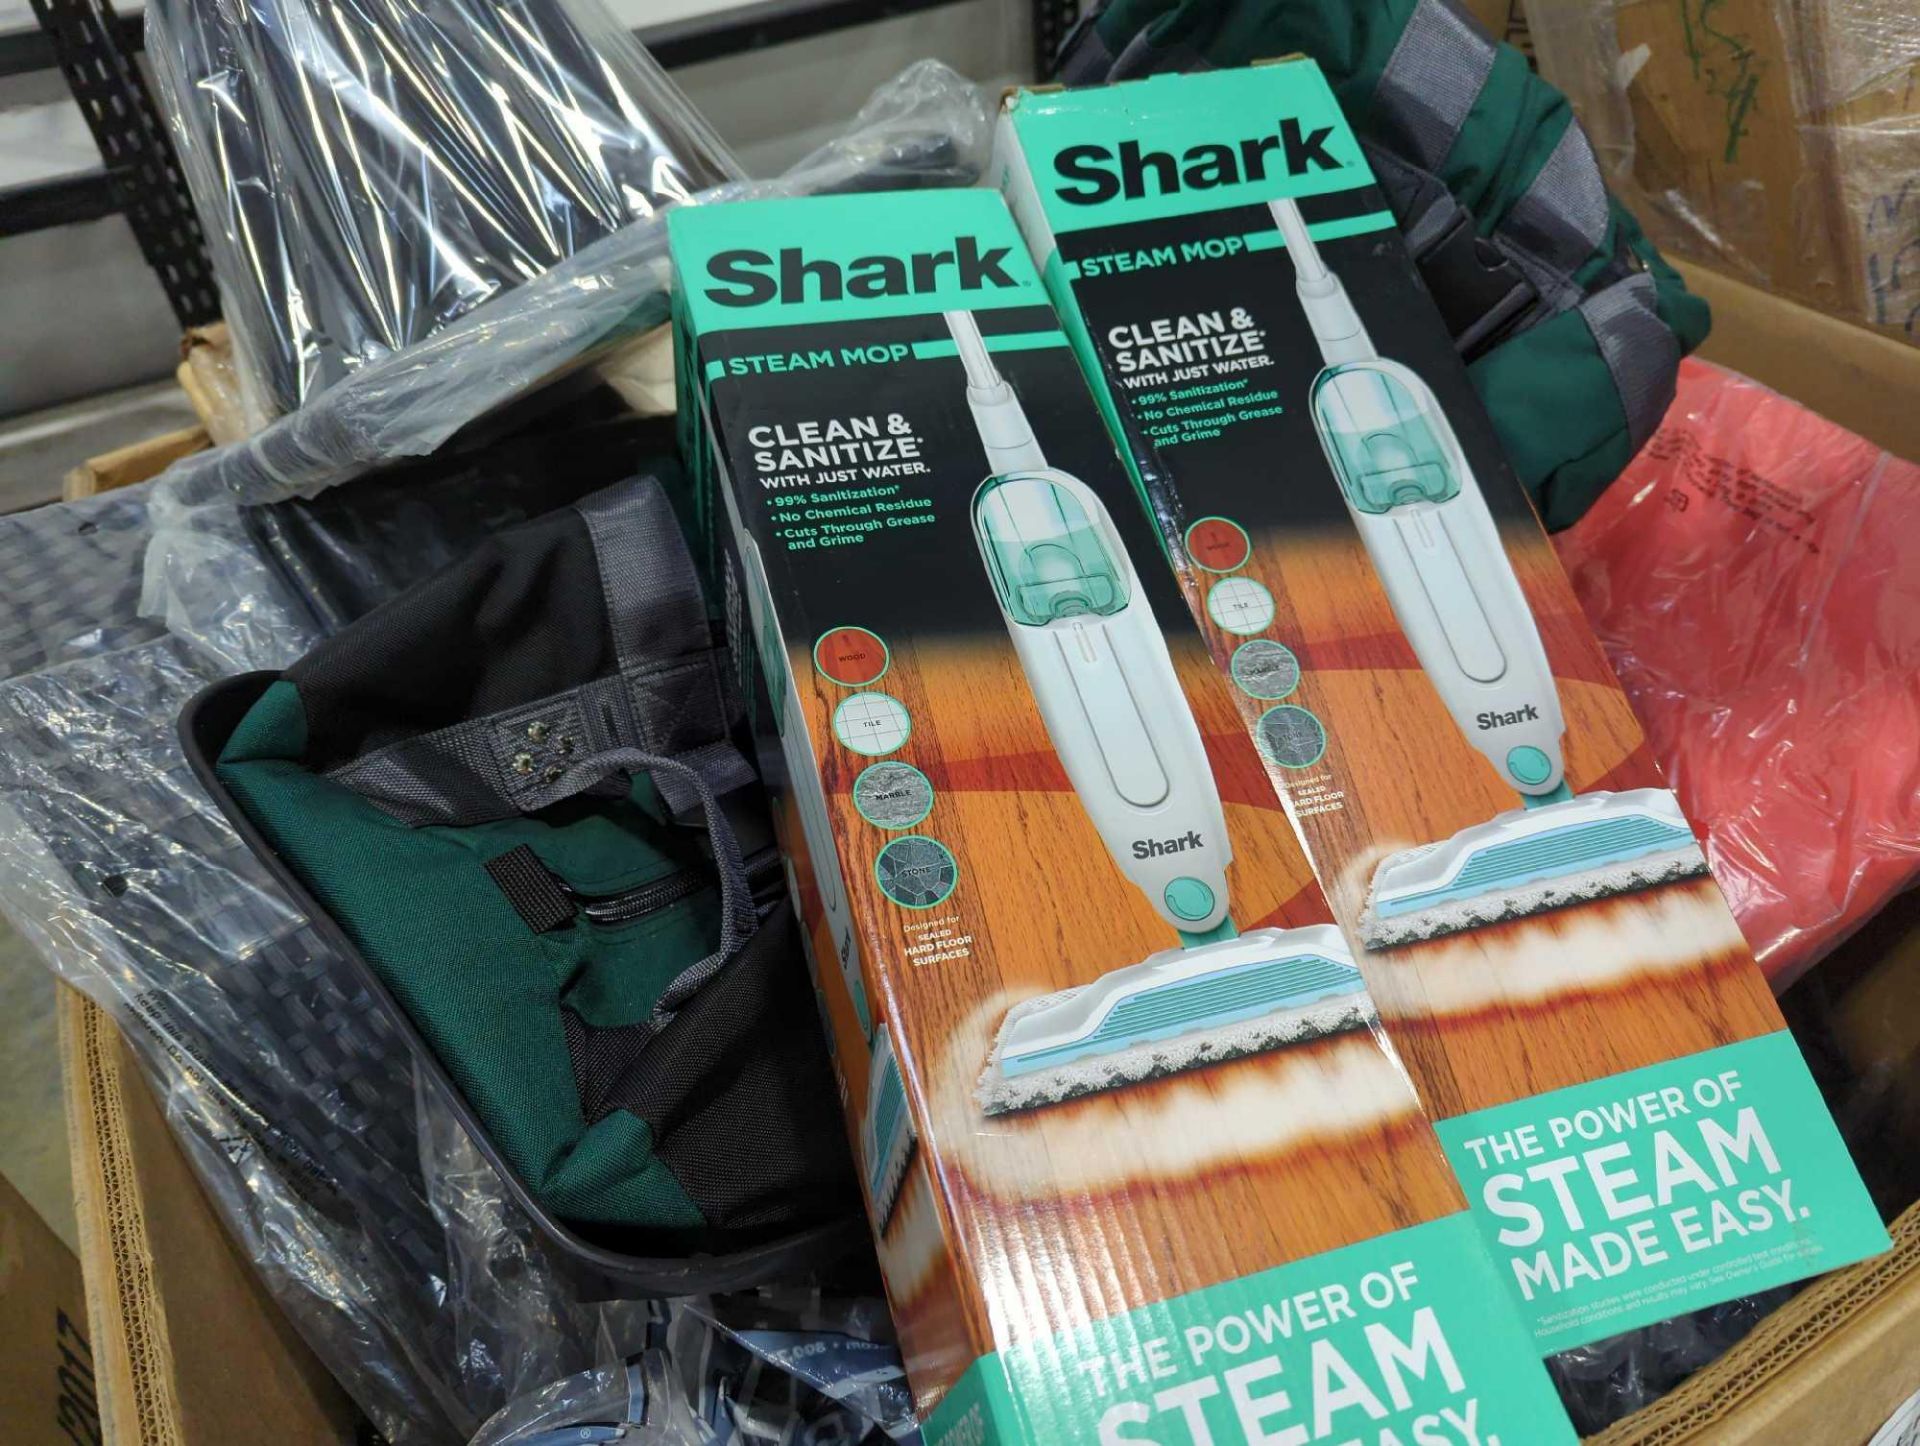 Shark Steam Mops, and more - Image 2 of 10